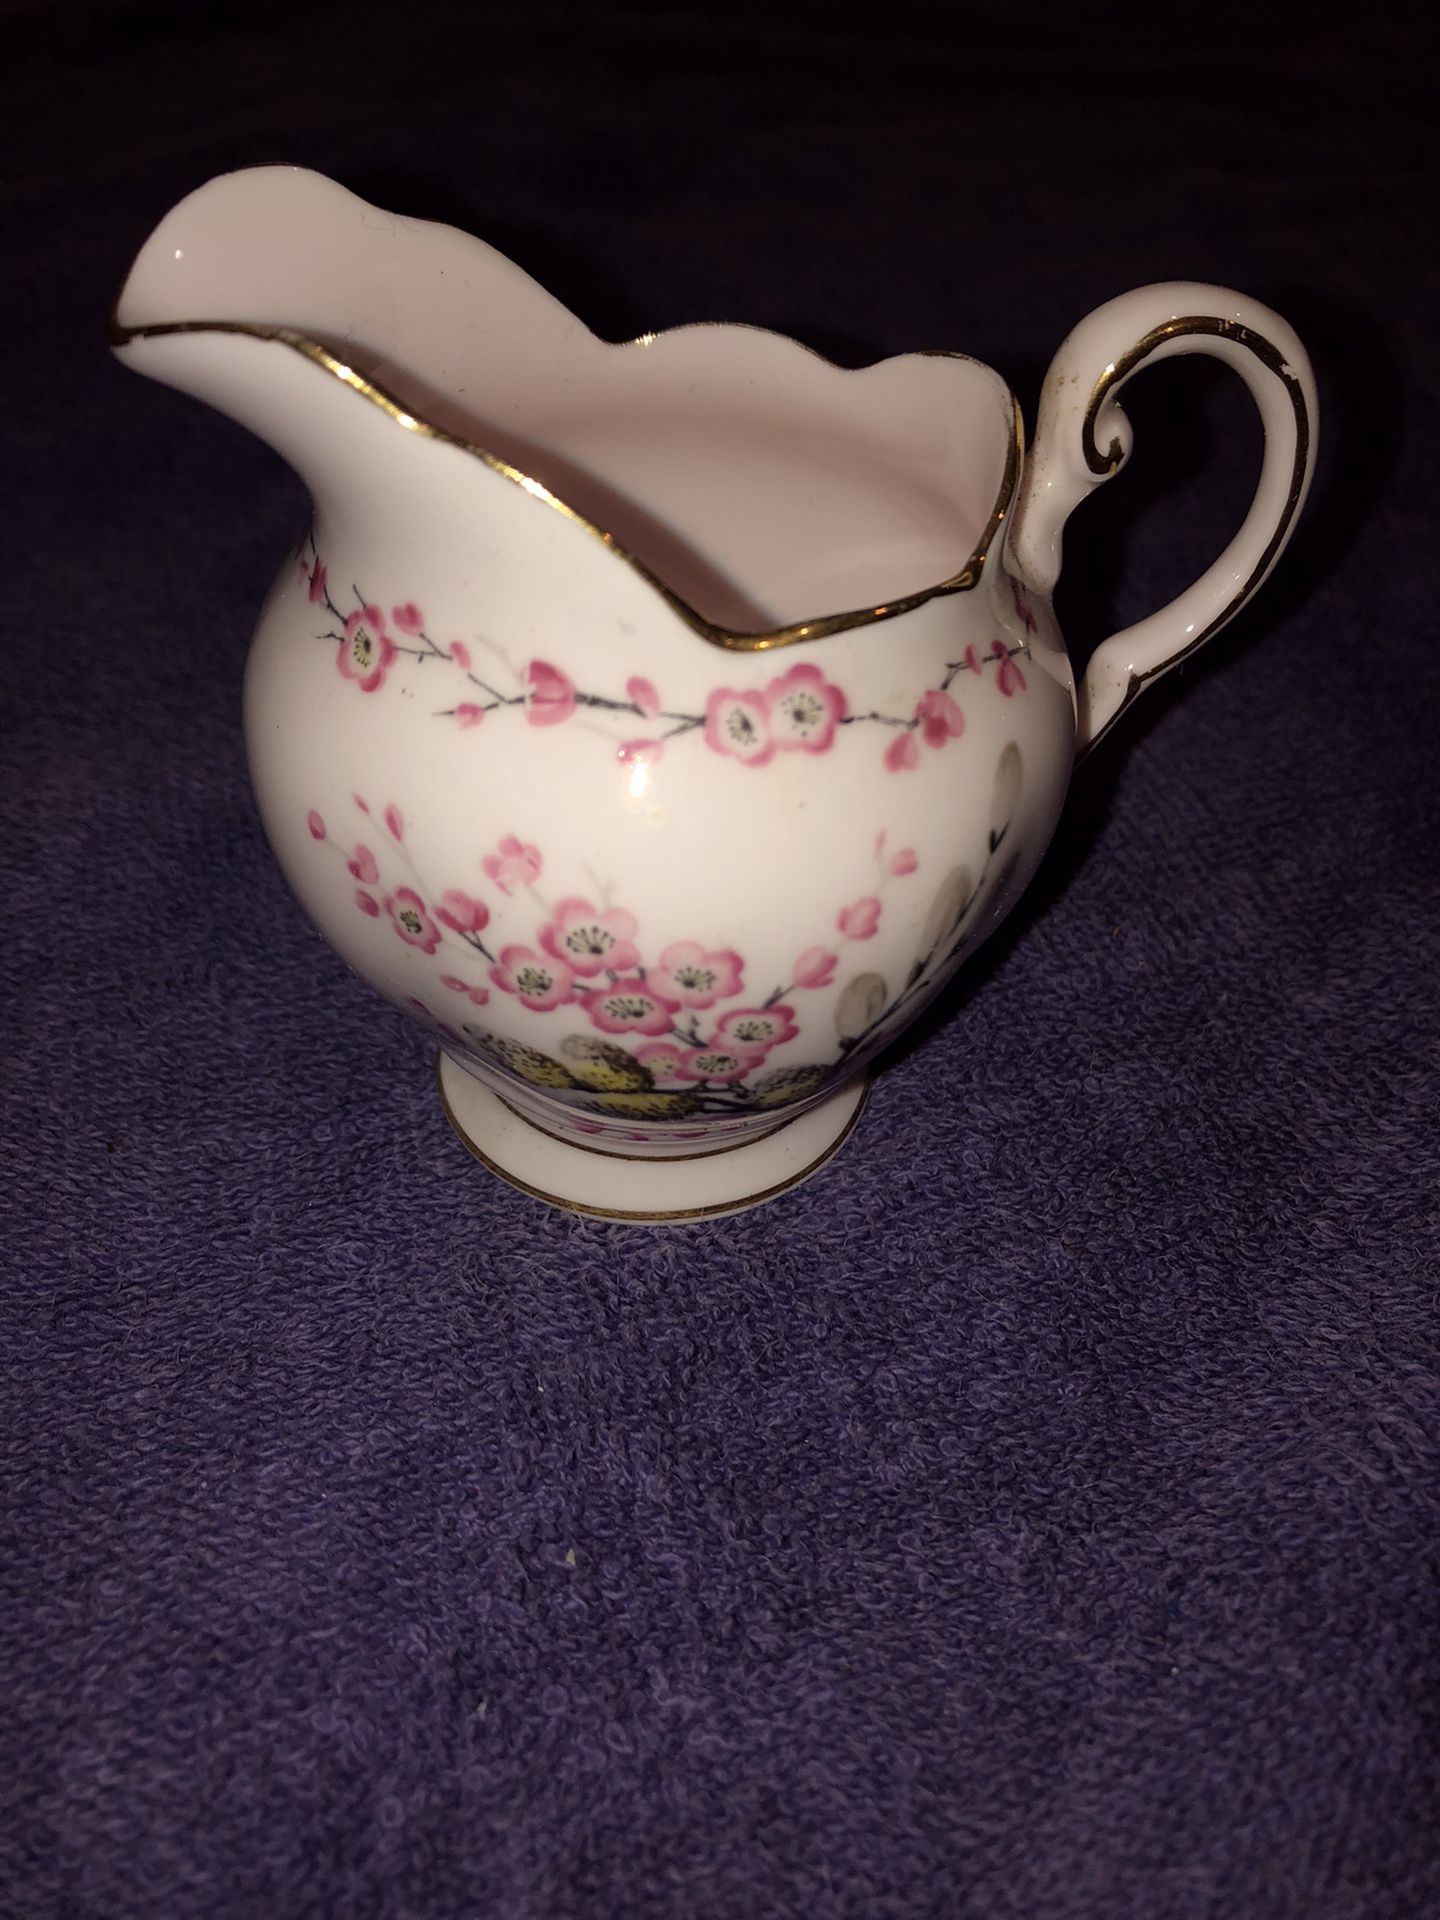 VINTAGE “APRIL BEAUTY” TUSCAN FINE ENGLISH BONE CHINA” MADE IN ENGLAND PITCHER/JUG